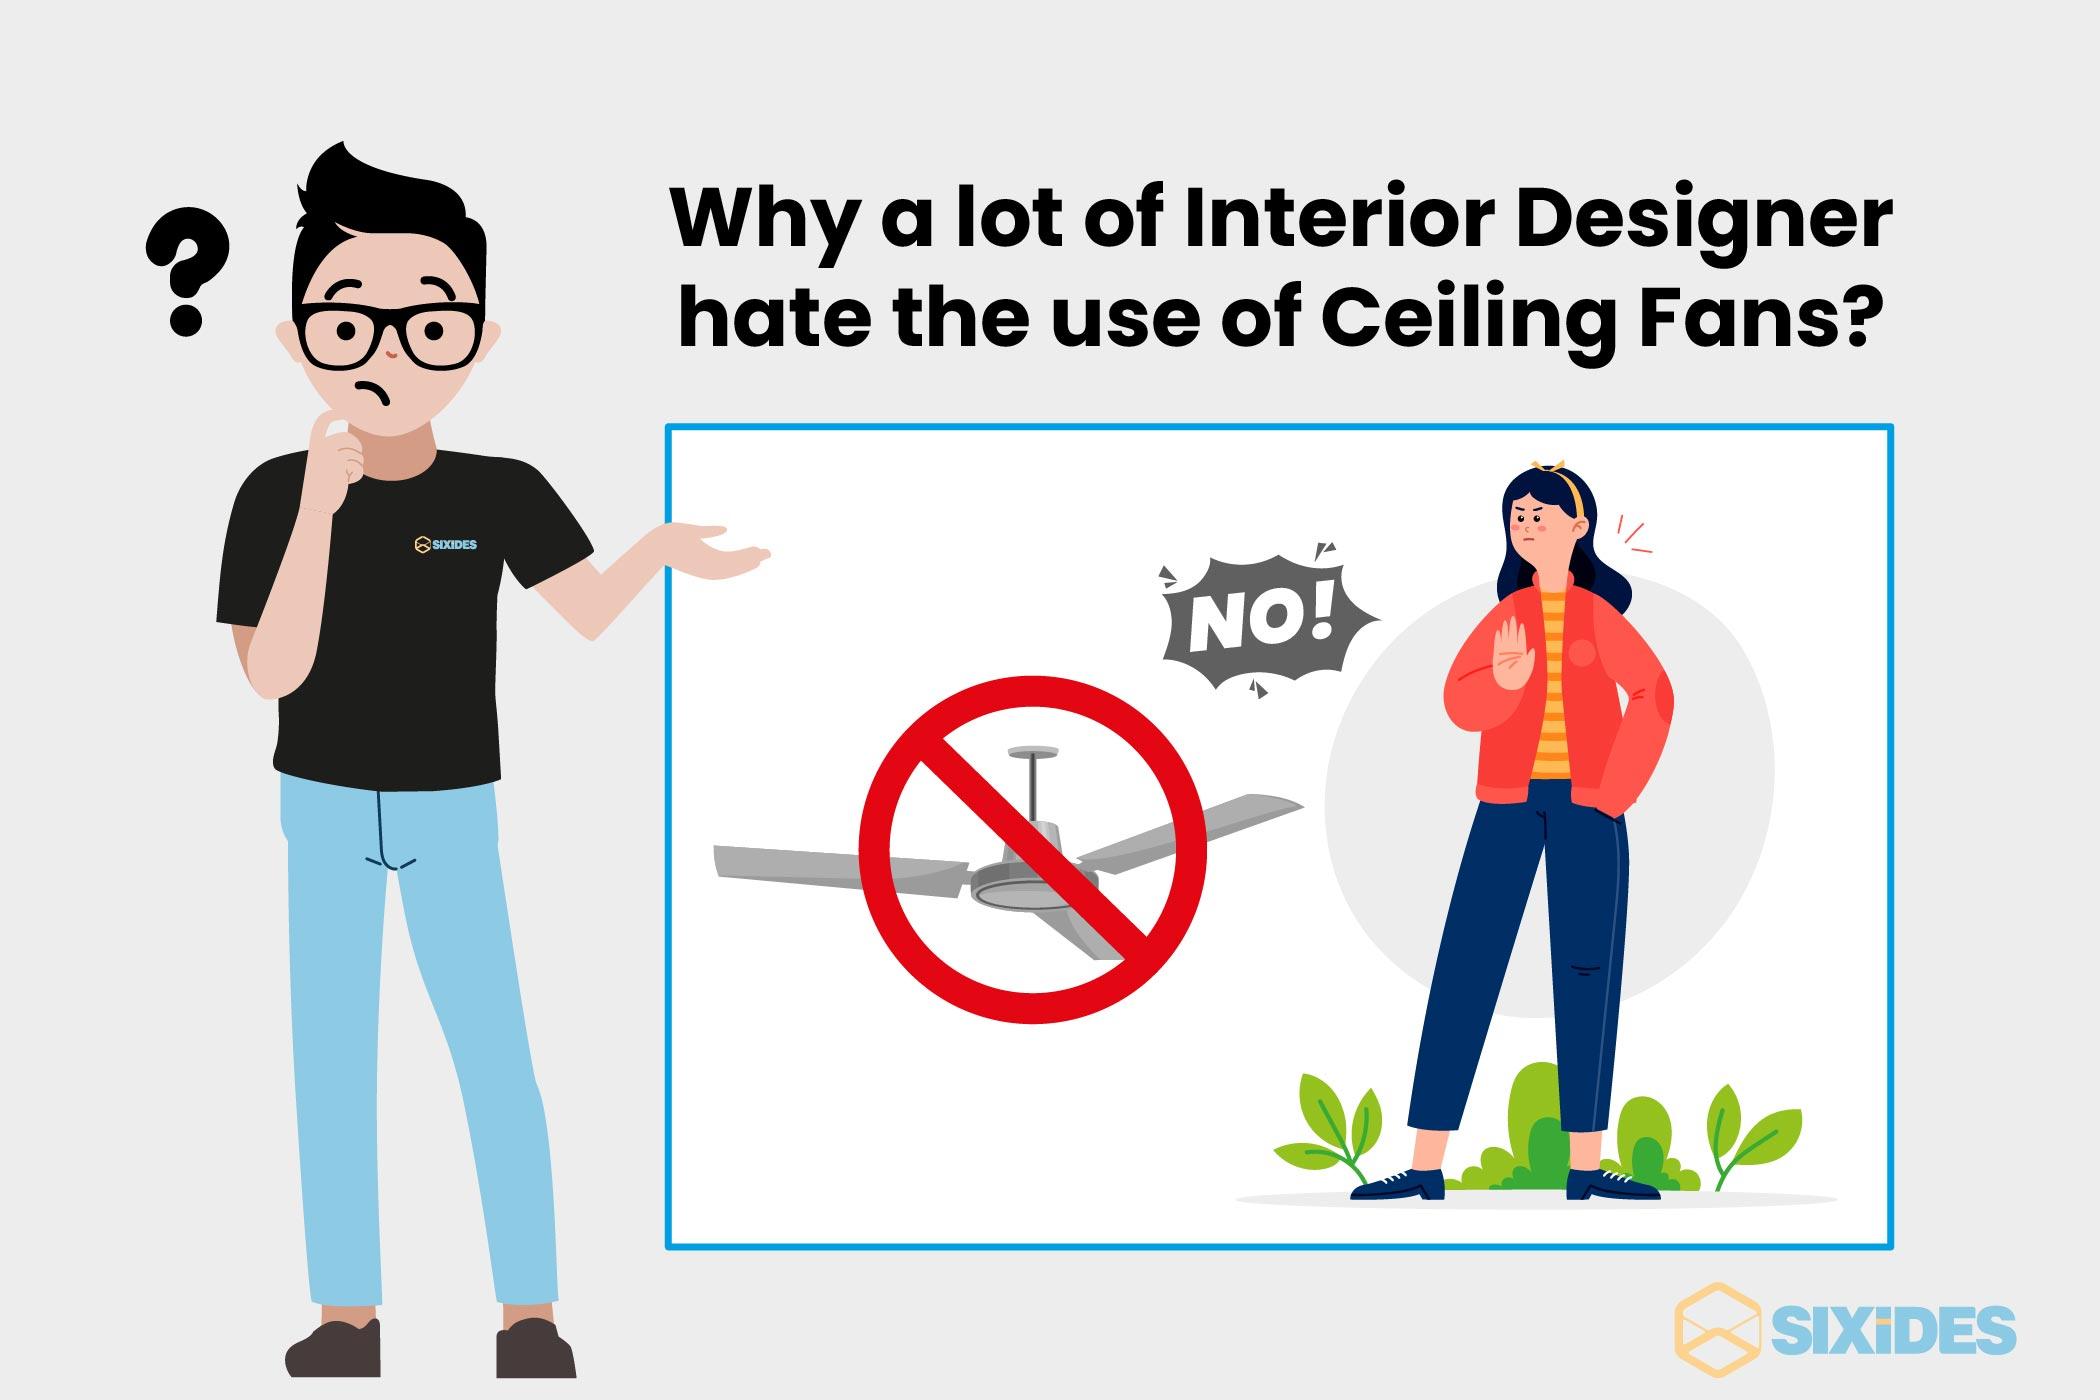 Do Designers Really Hate Ceiling Fans?